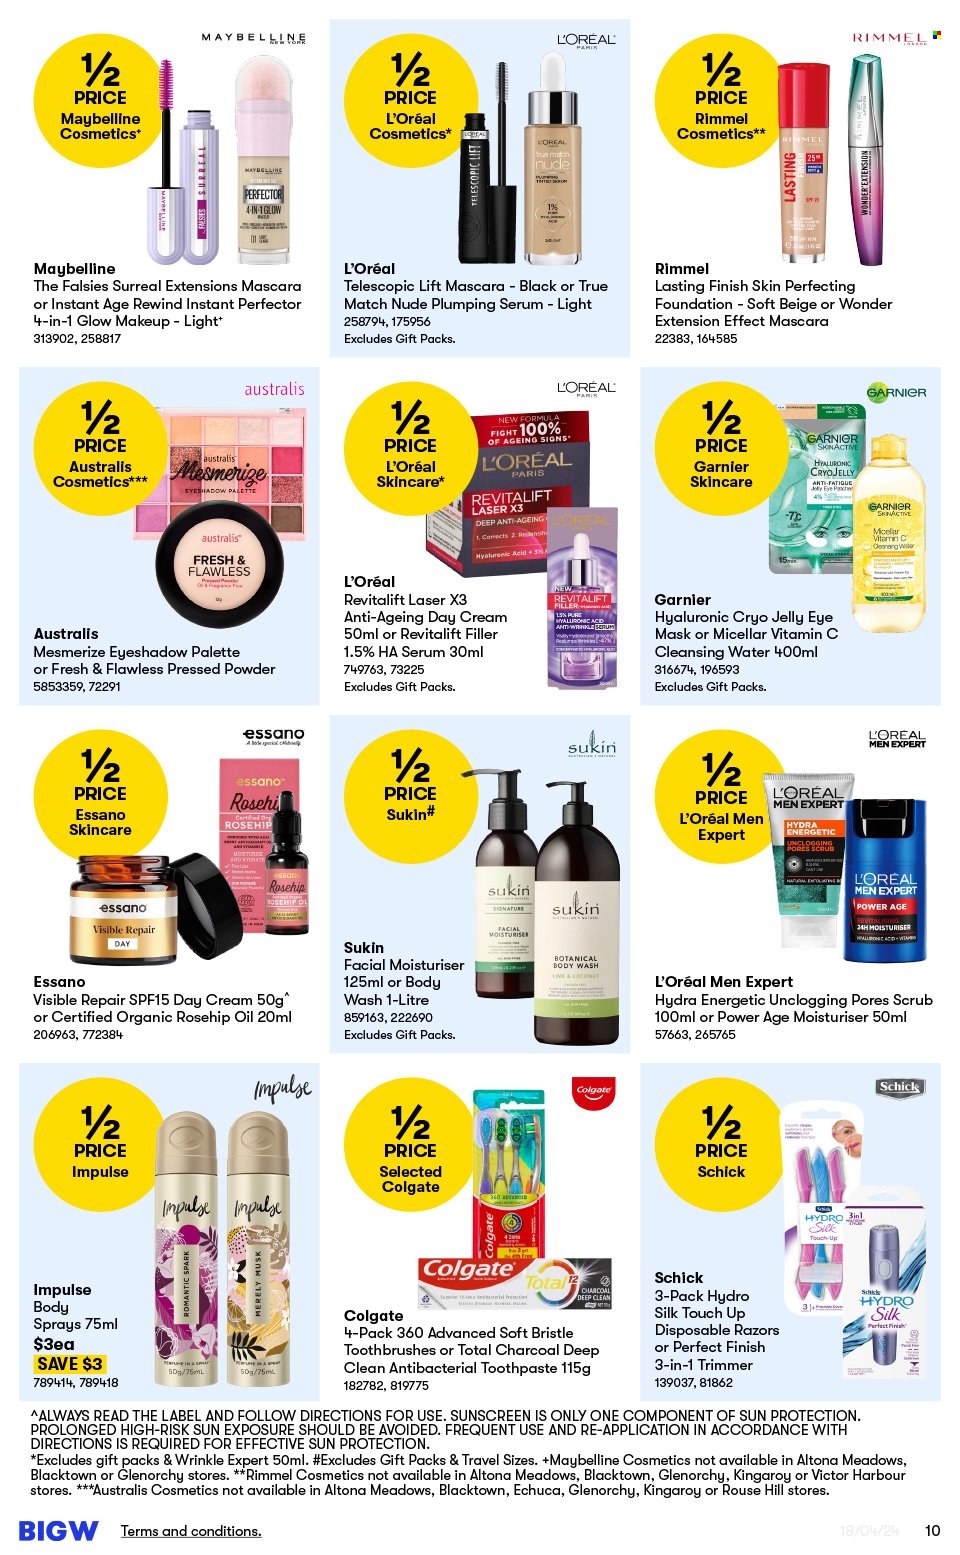 thumbnail - BIG W Catalogue - Sales products - gift set, body wash, Colgate, toothbrush, toothpaste, day cream, Garnier, L’Oréal, serum, L’Oréal Men, Revitalift Laser, rosehip oil, plumping serum, eye mask, Essano, Sukin, body spray, sunscreen lotion, Schick, disposable razor, eye palette, eyeshadow, makeup, mascara, Maybelline, Rimmel, face powder, decorative cosmetic, label, Victor, trimmer, laser. Page 10.